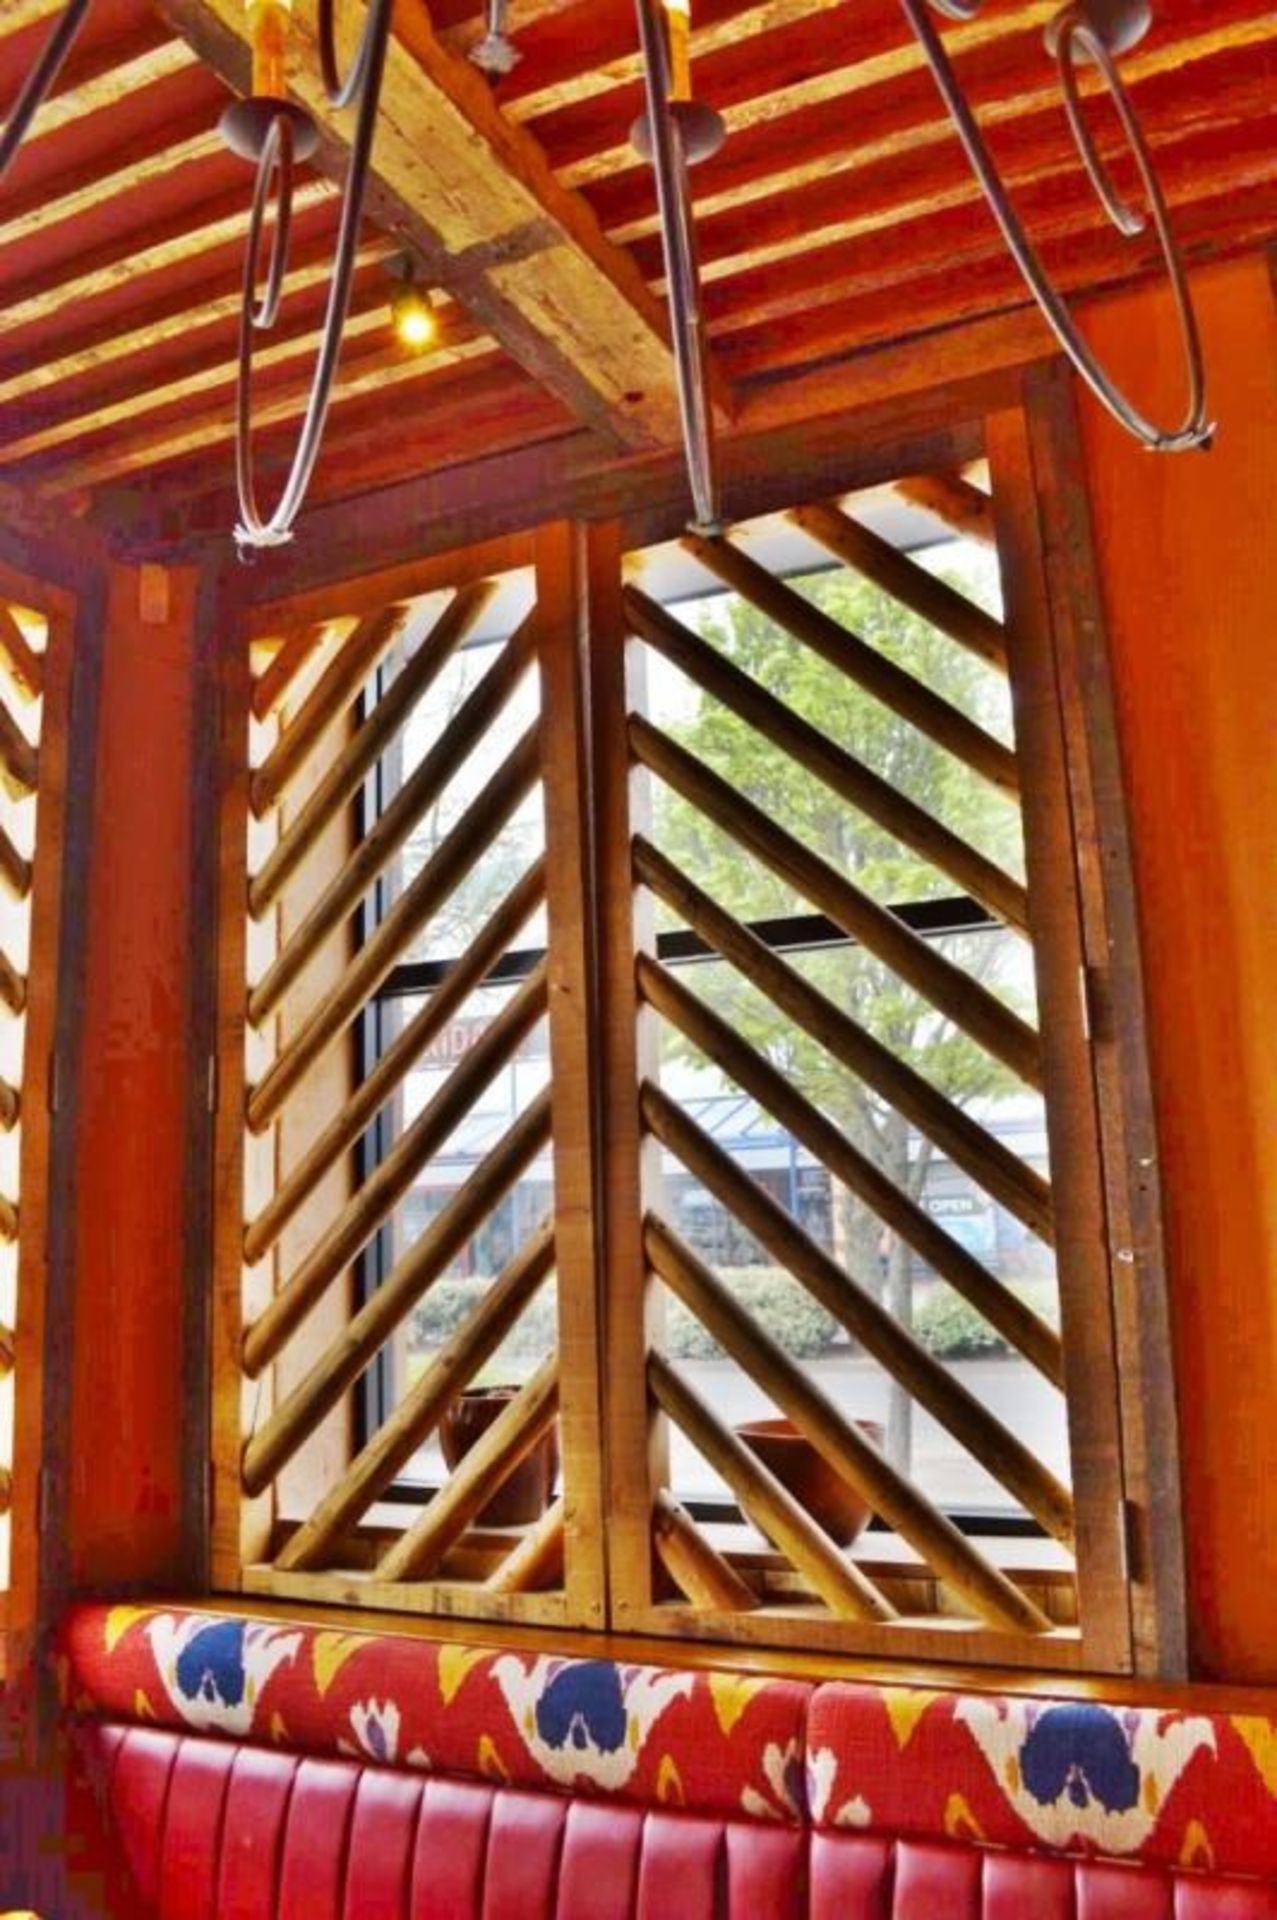 4 x Wooden Timber Window Shutters - Each Shutter Features Two Timber Frames With Round Wood - Image 5 of 5